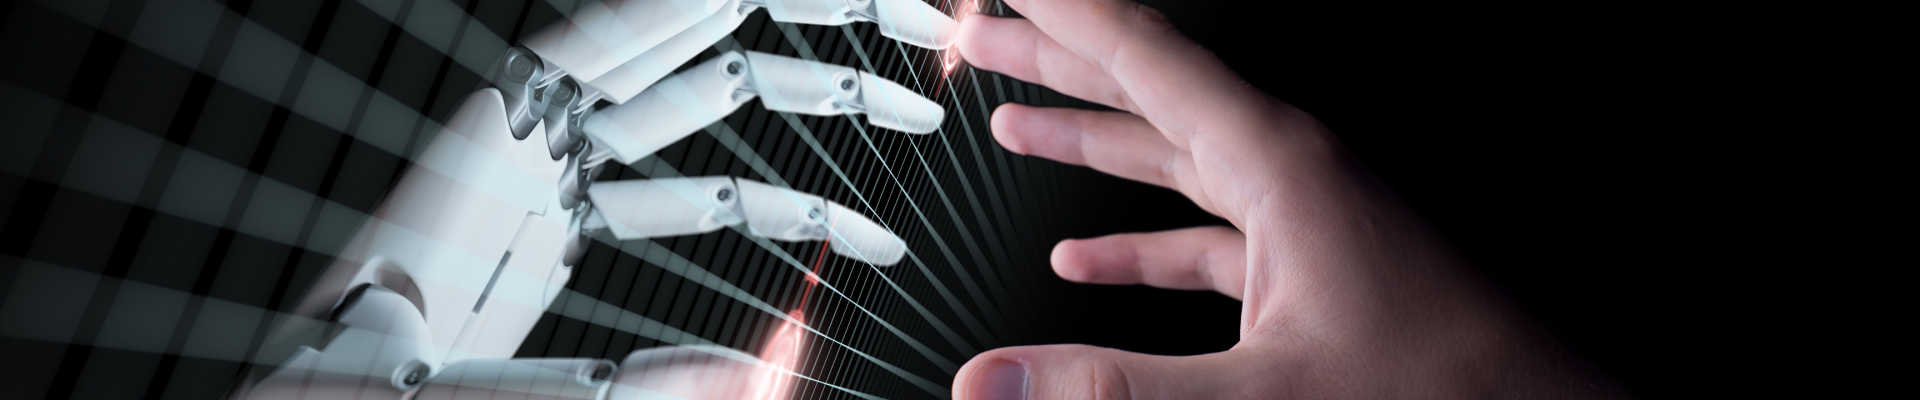 Hands of Robot and Human Touching. Virtual Reality or Artificial Intelligence Technology